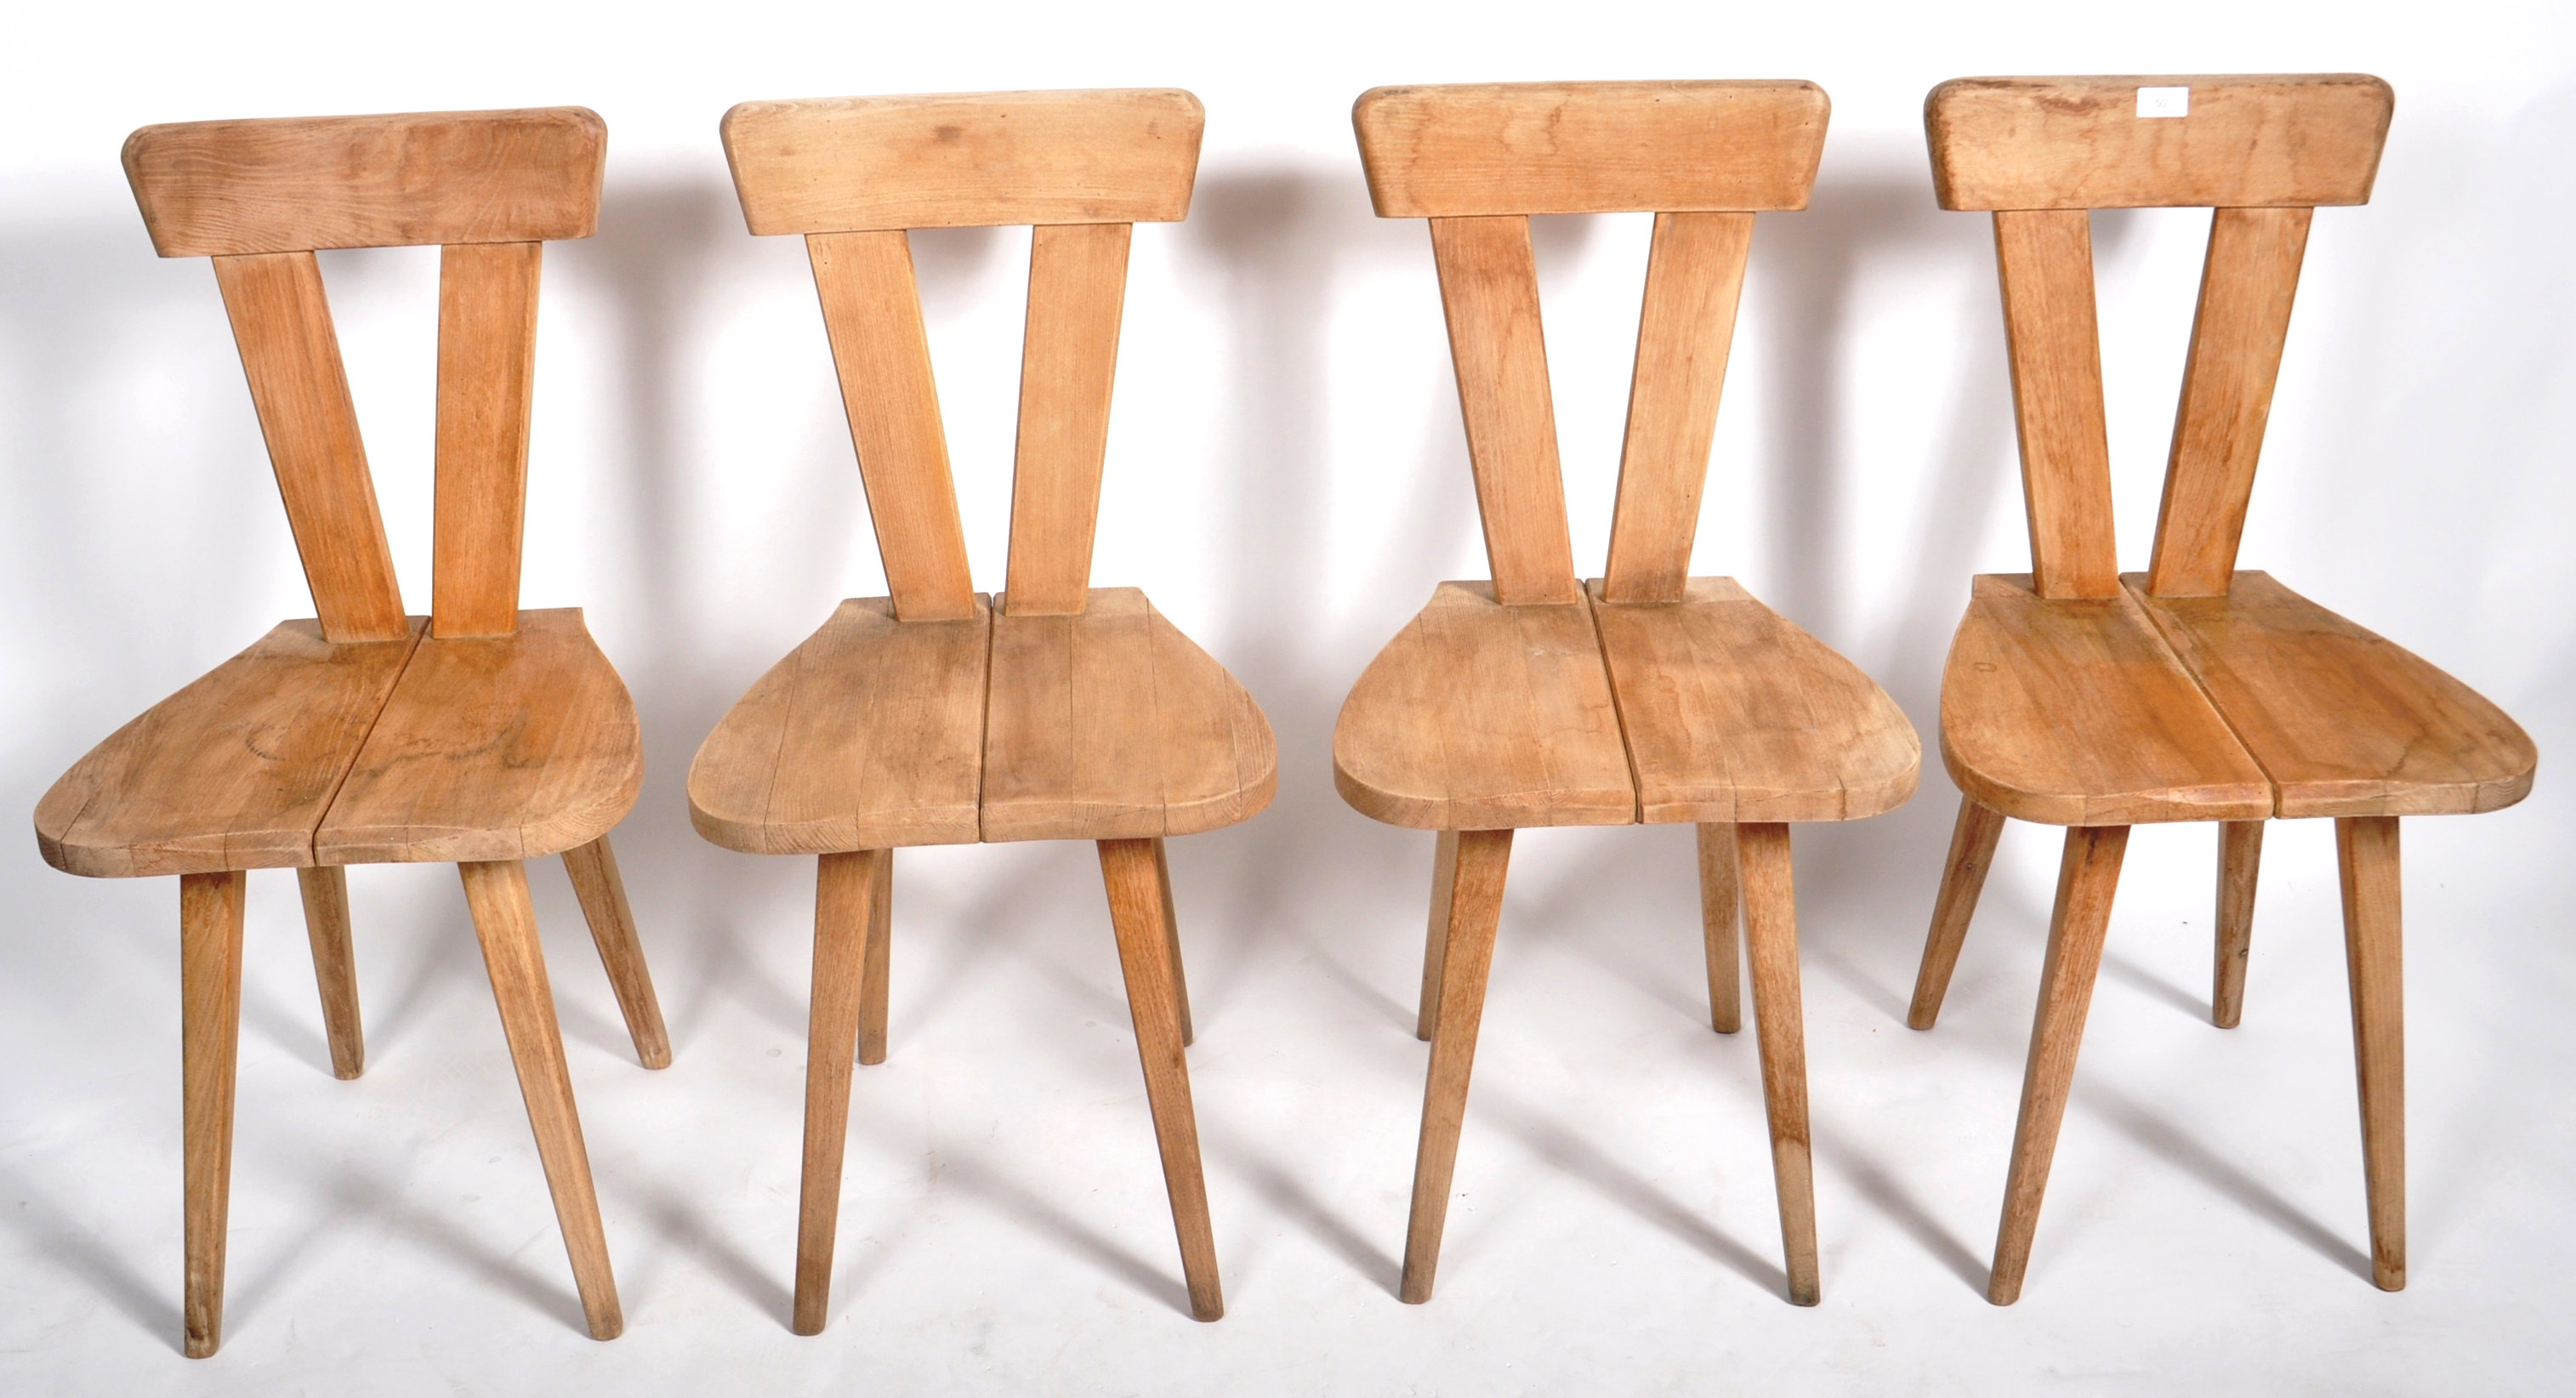 ZYDEL BY WINCZE & SZLEKYS - SET OF FOUR DINING CHAIRS - Image 2 of 7